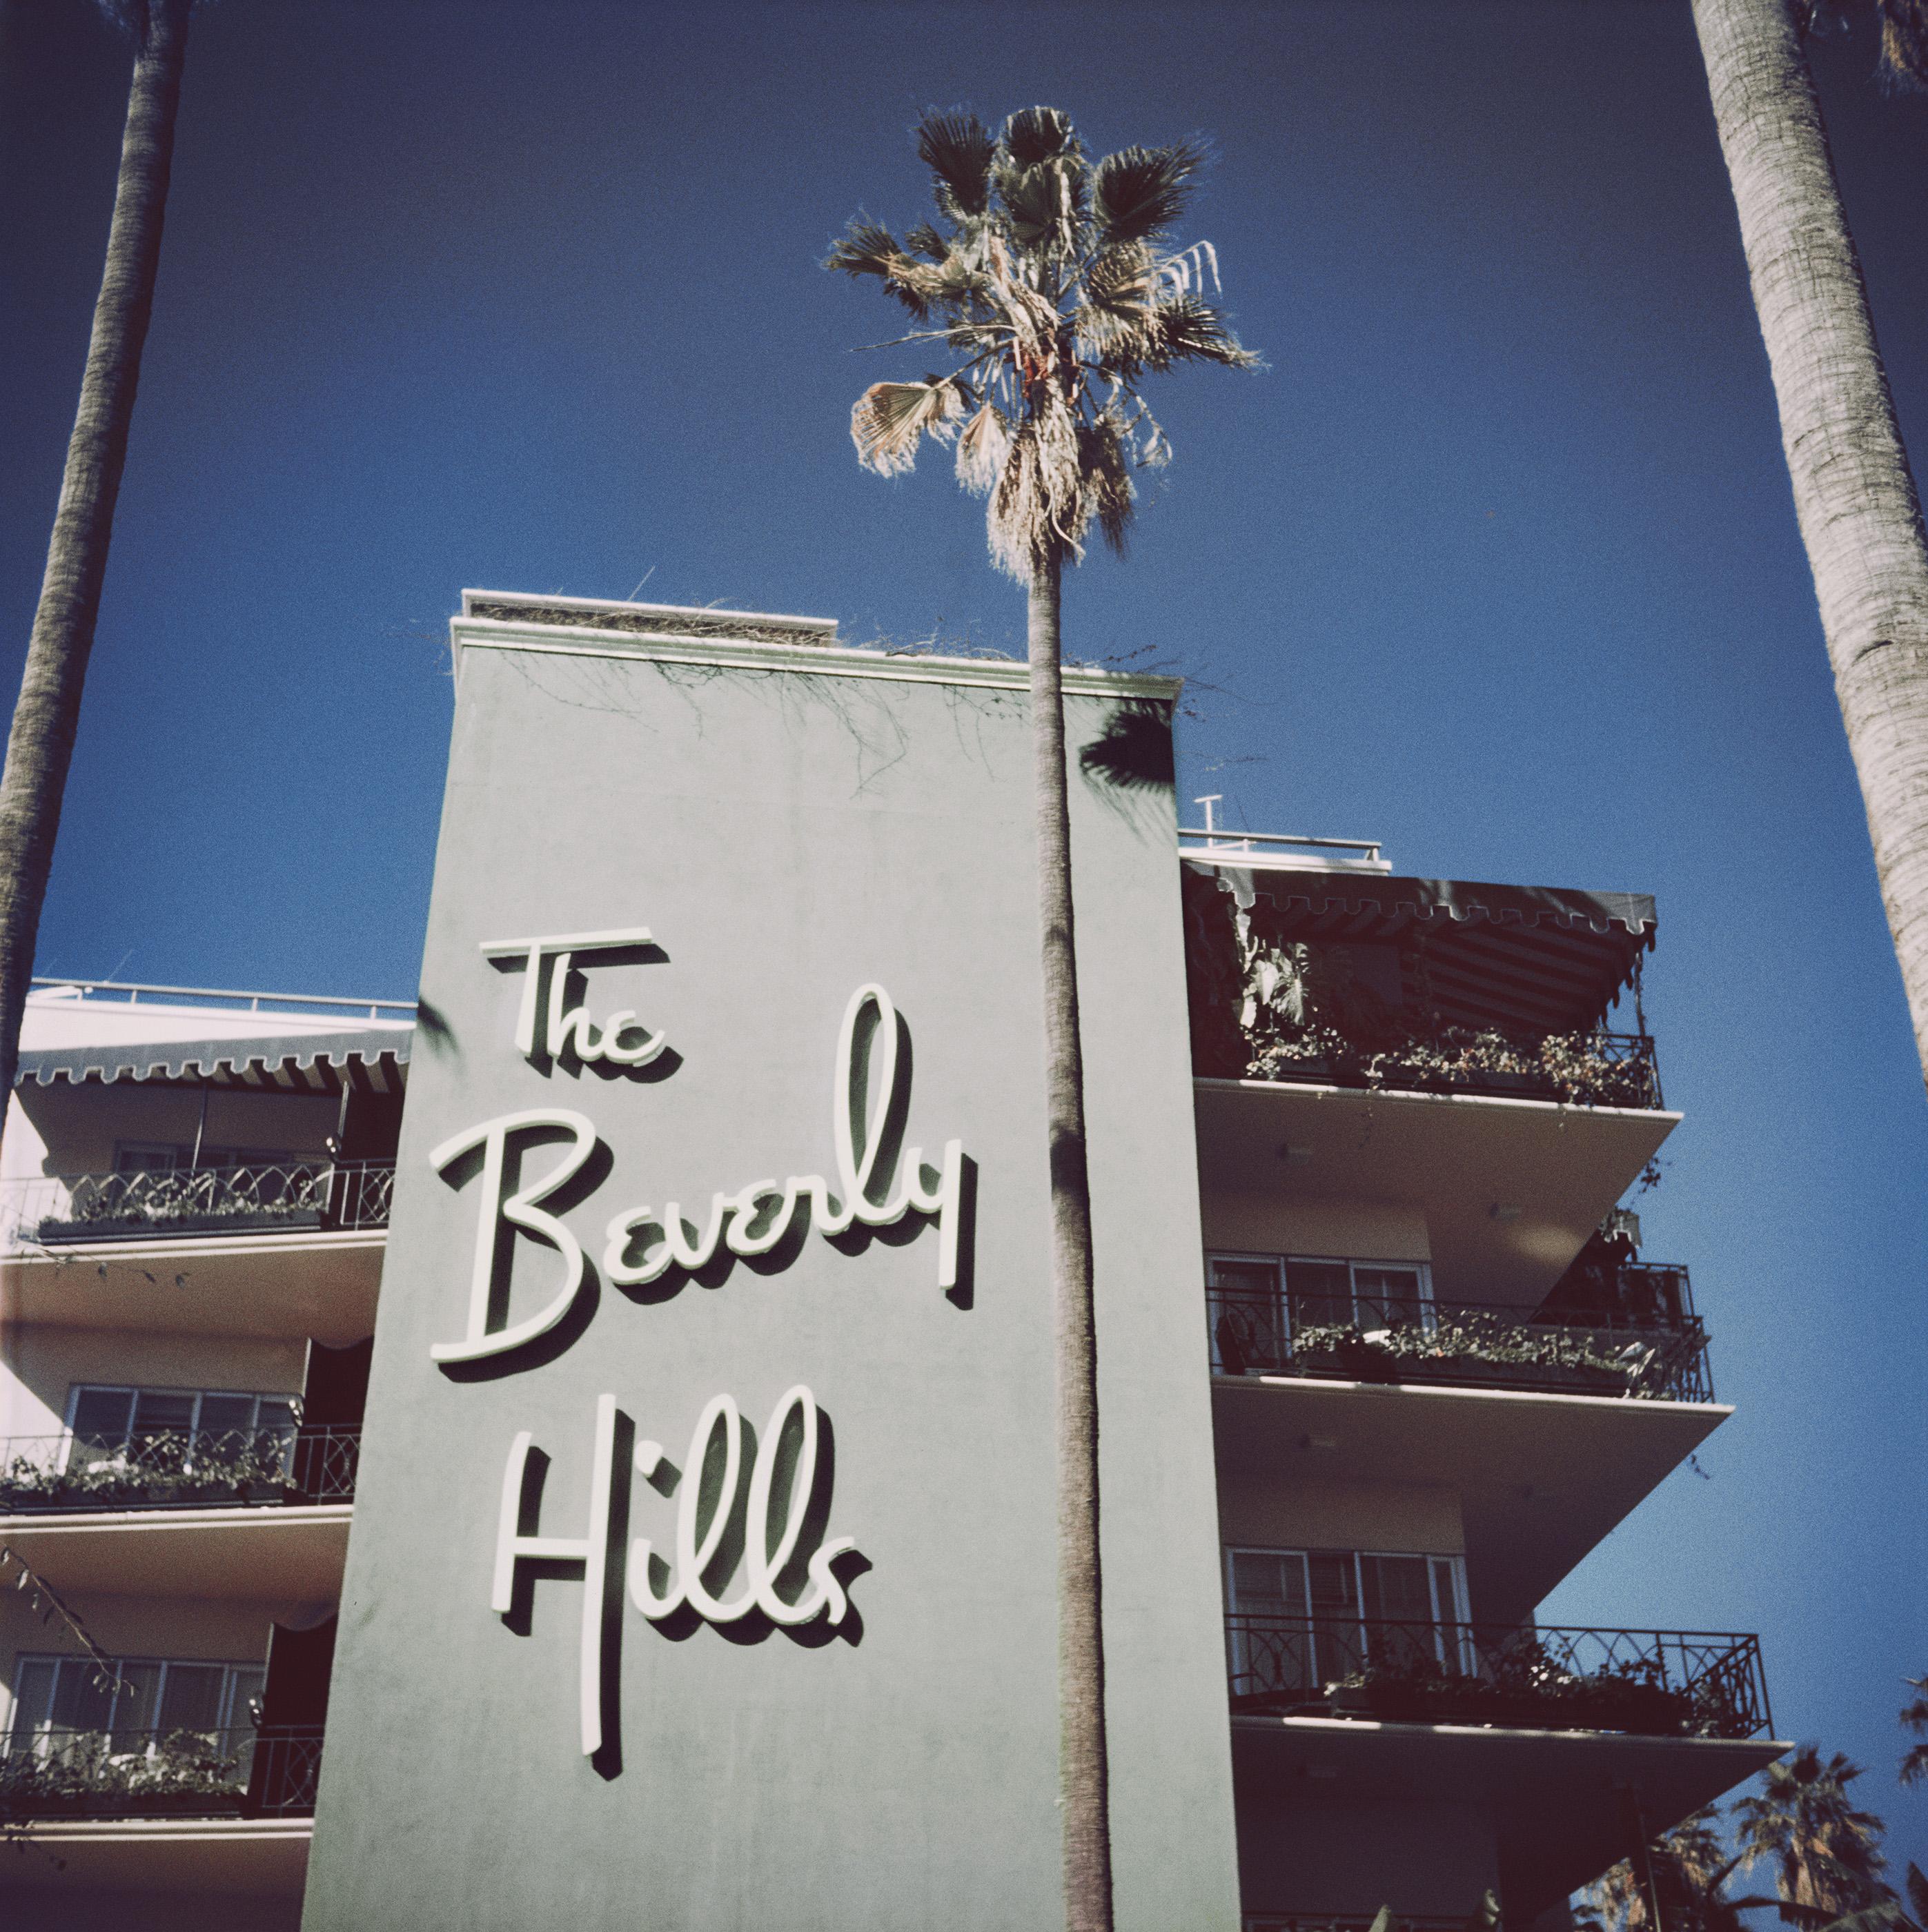 Beverly Hills Hotel
1957
C print
Estate stamped and hand numbered edition of 150 with certificate of authenticity from the estate.

The sign on the side of the Beverly Hills Hotel on Sunset Boulevard in California, 1957. 

Slim Aarons (1916-2006)